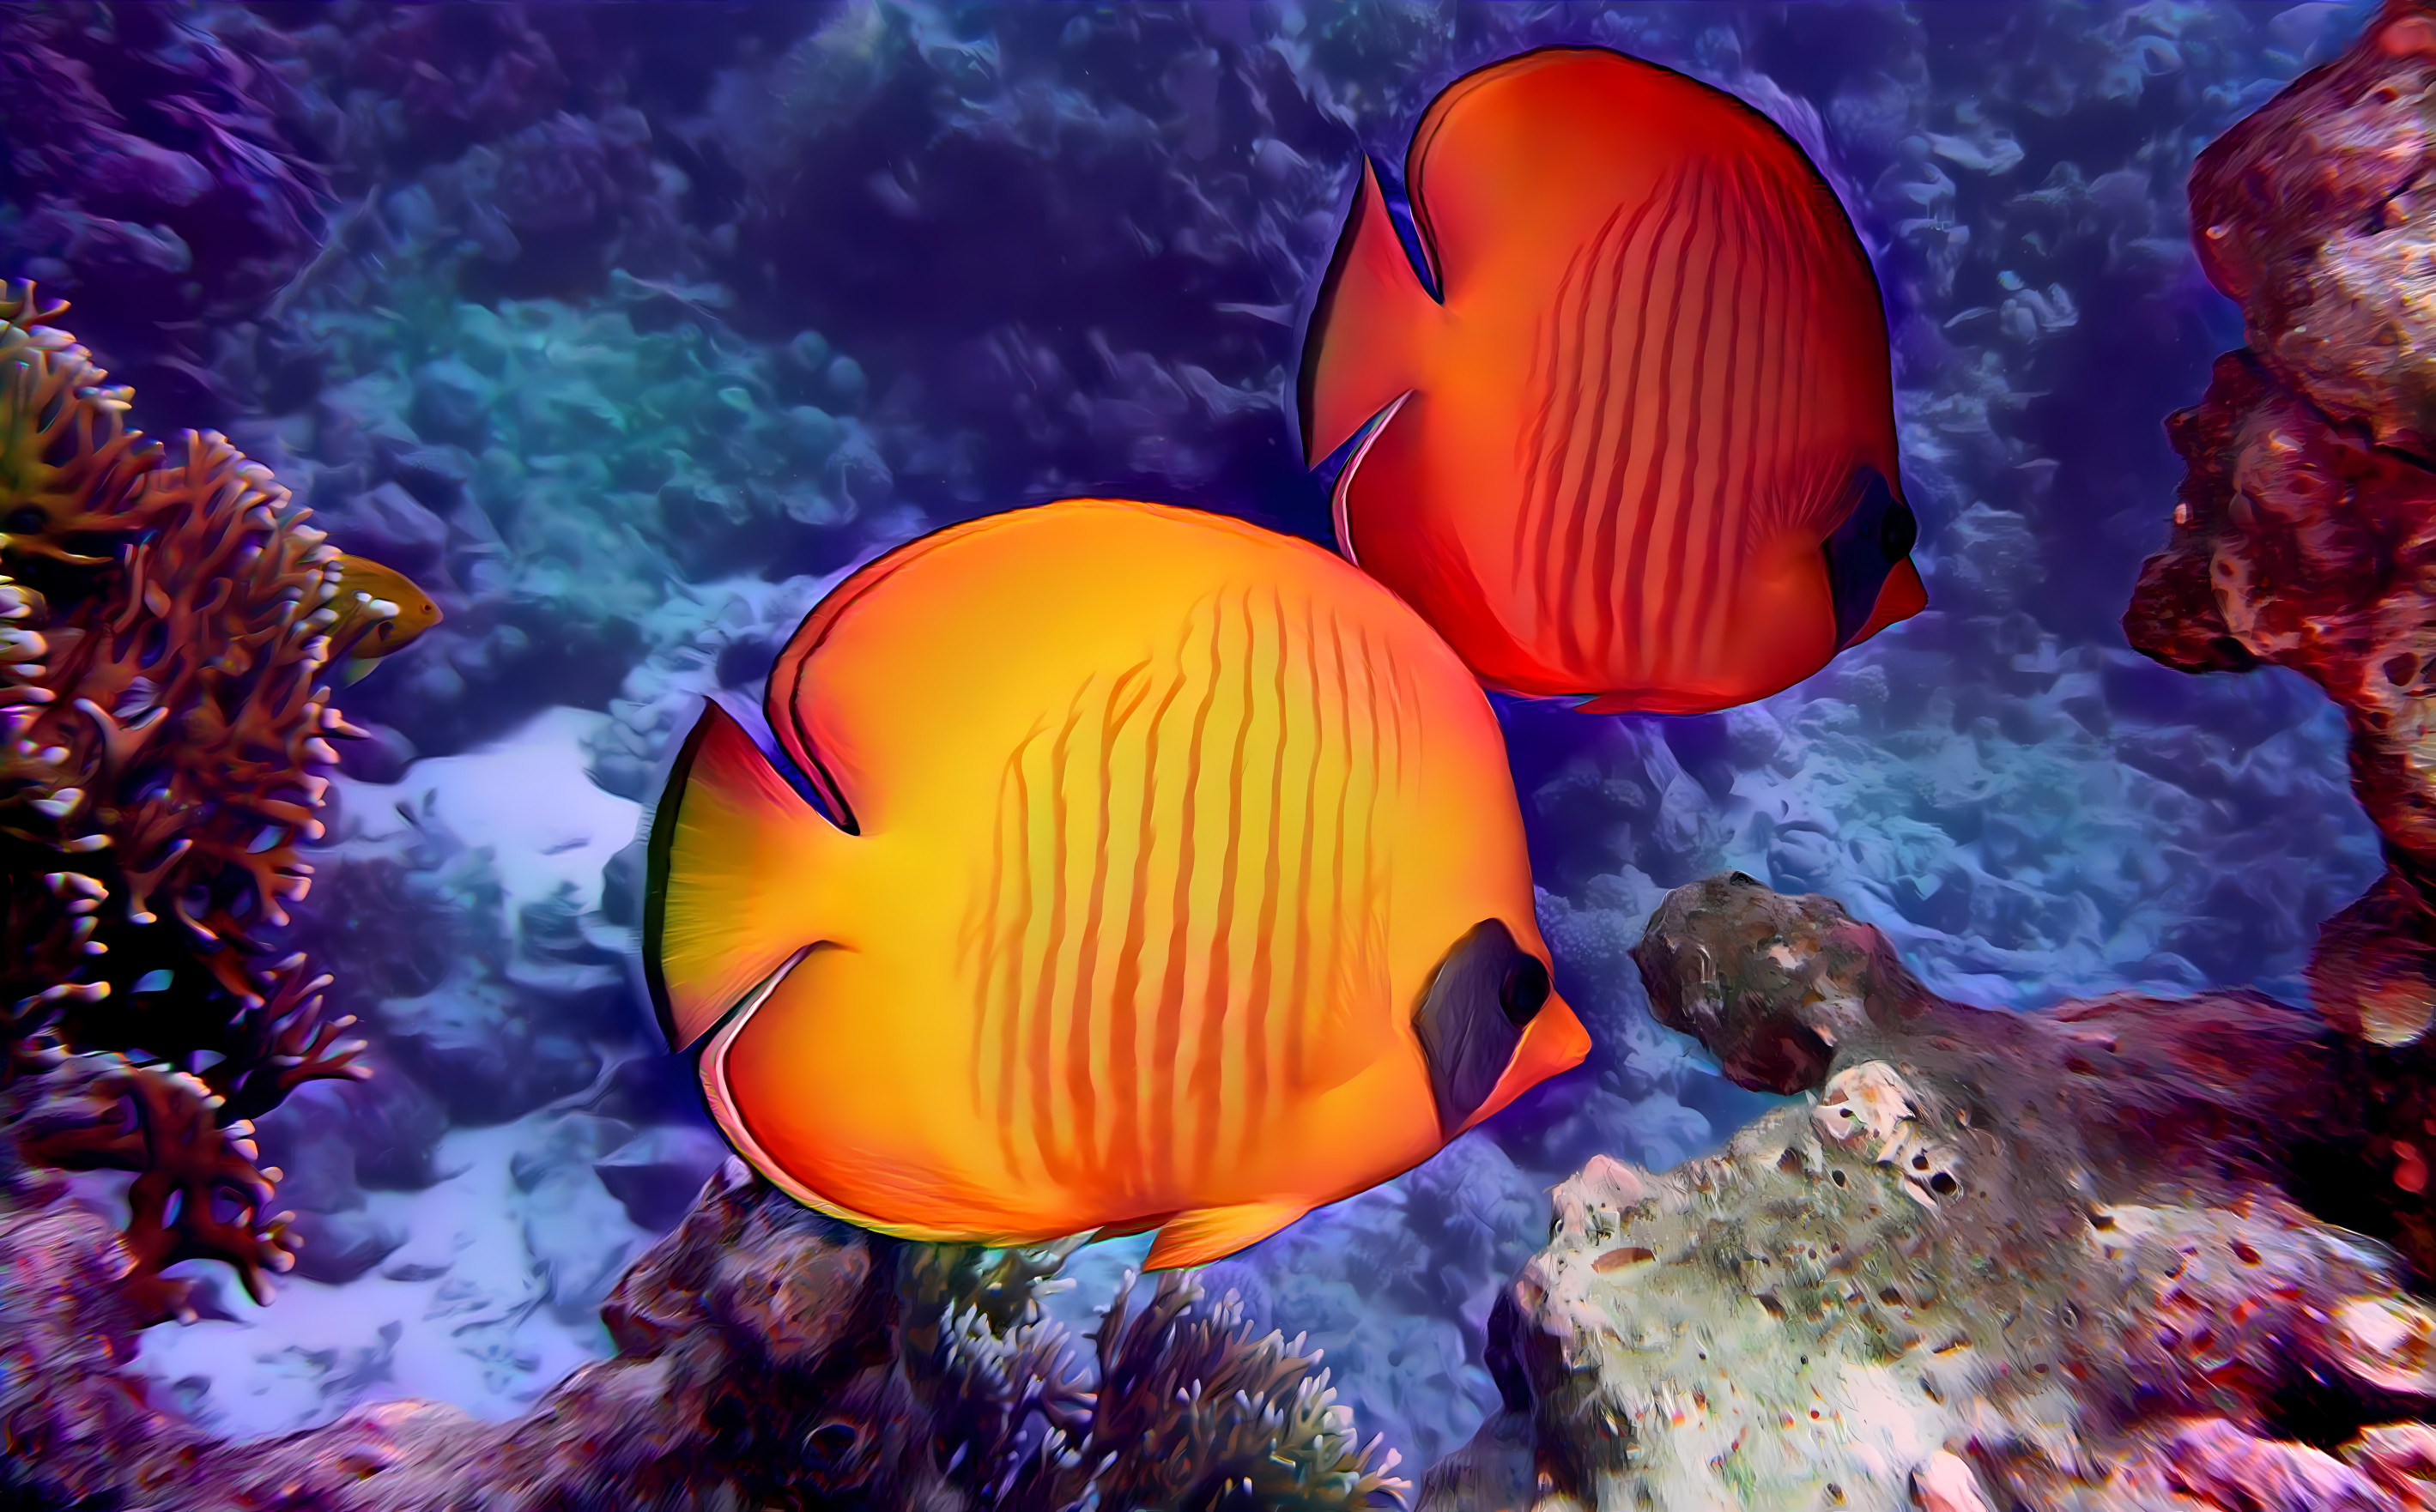 Two orange fish, formerly yellow